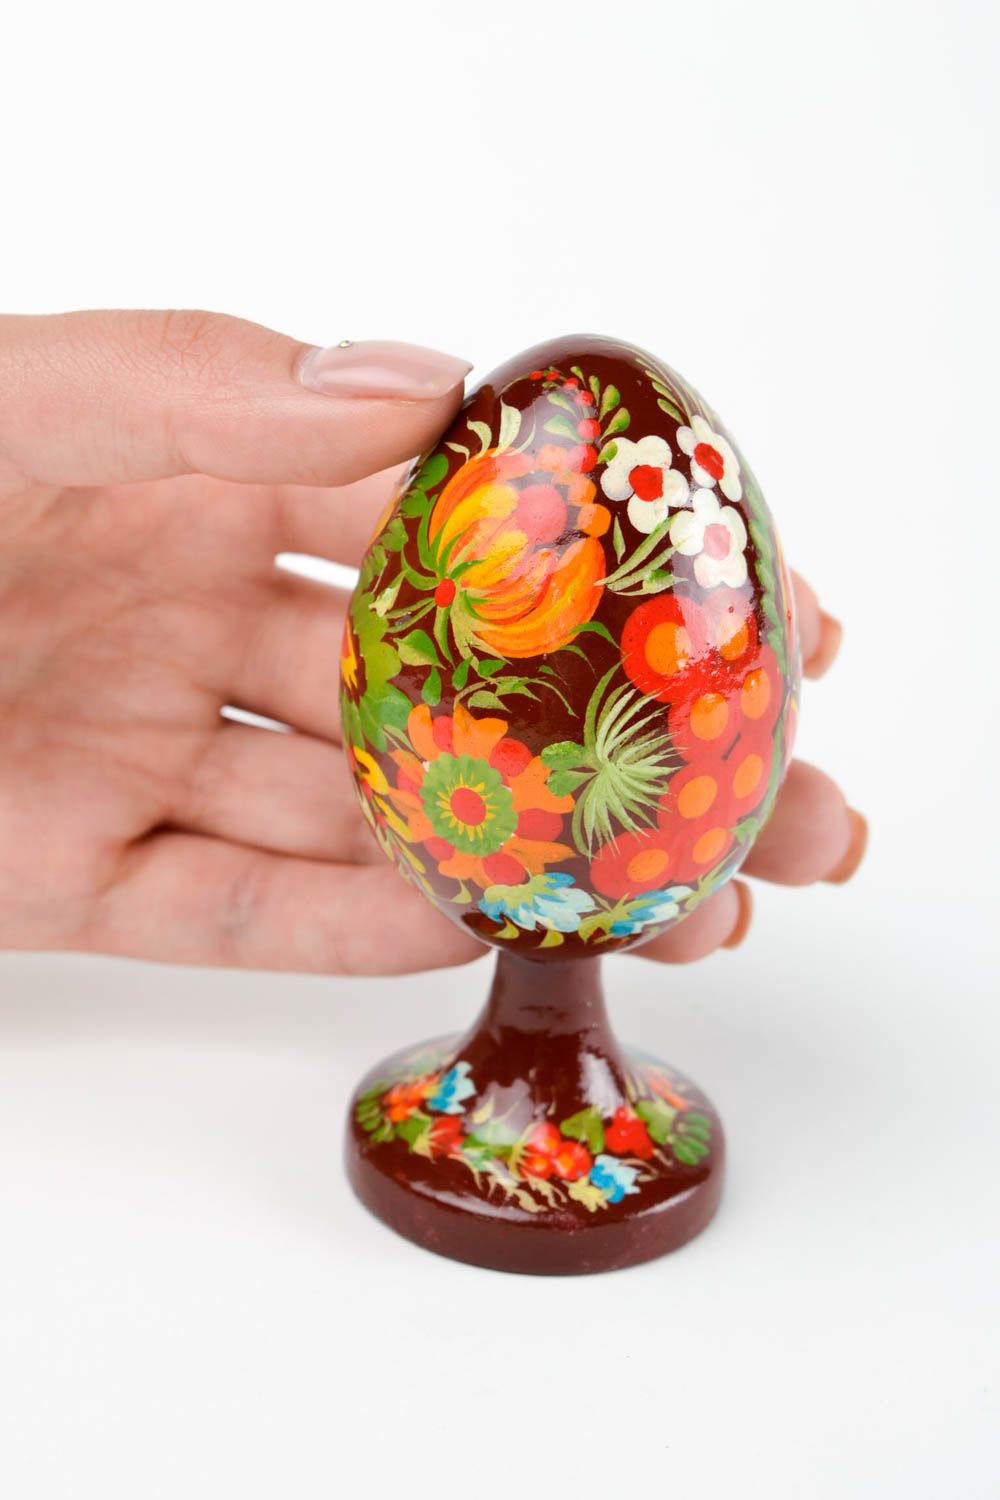 Beautiful handmade Easter egg home design Easter gift ideas decorative use only photo 2